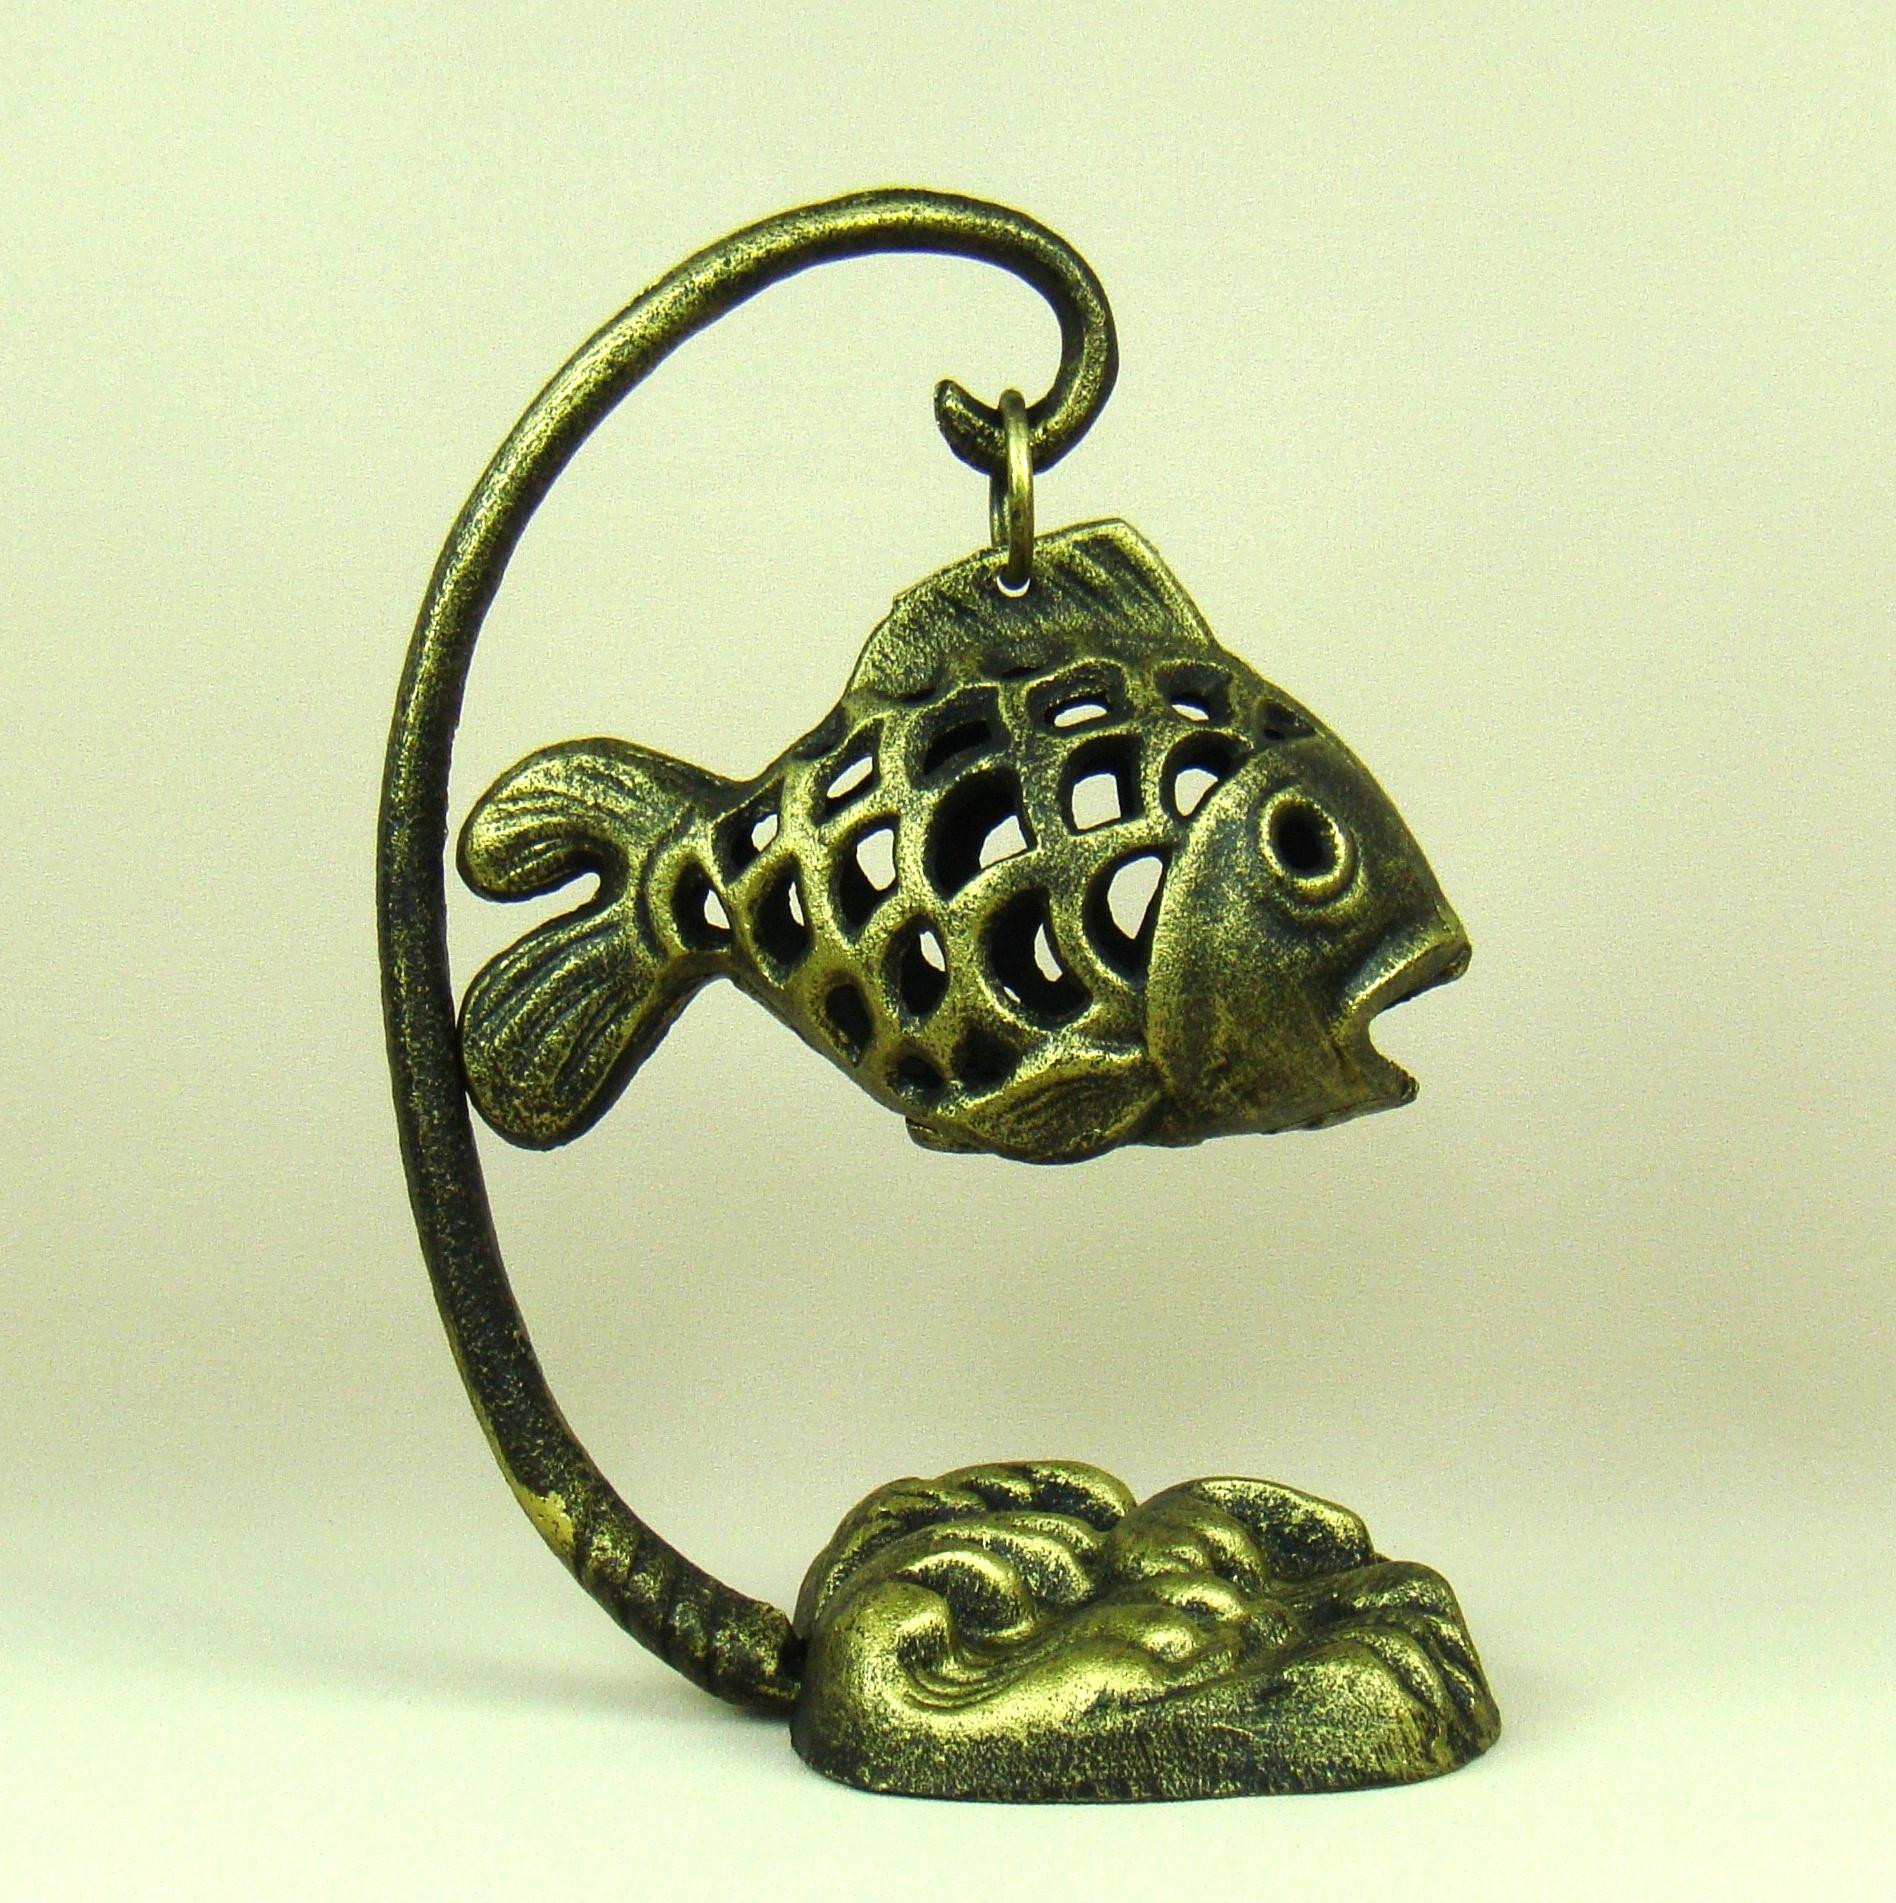 15 Popular Wrought Iron Vase 2024 free download wrought iron vase of candle stands wholesale superb creative cast iron fish candle holder with candle stands wholesale superb creative cast iron fish candle holder hanging metal hollow out l